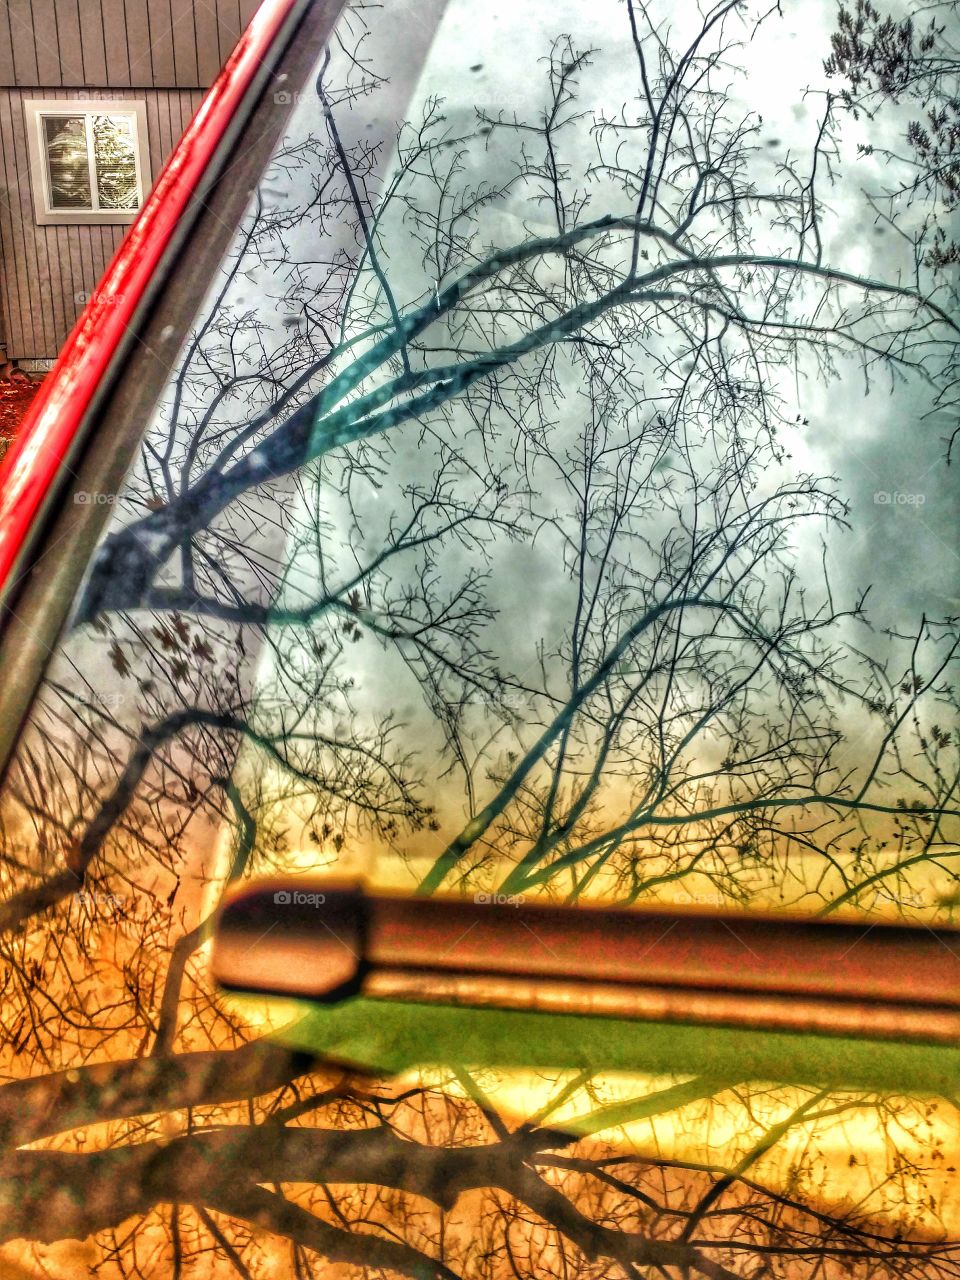 windshield reflections